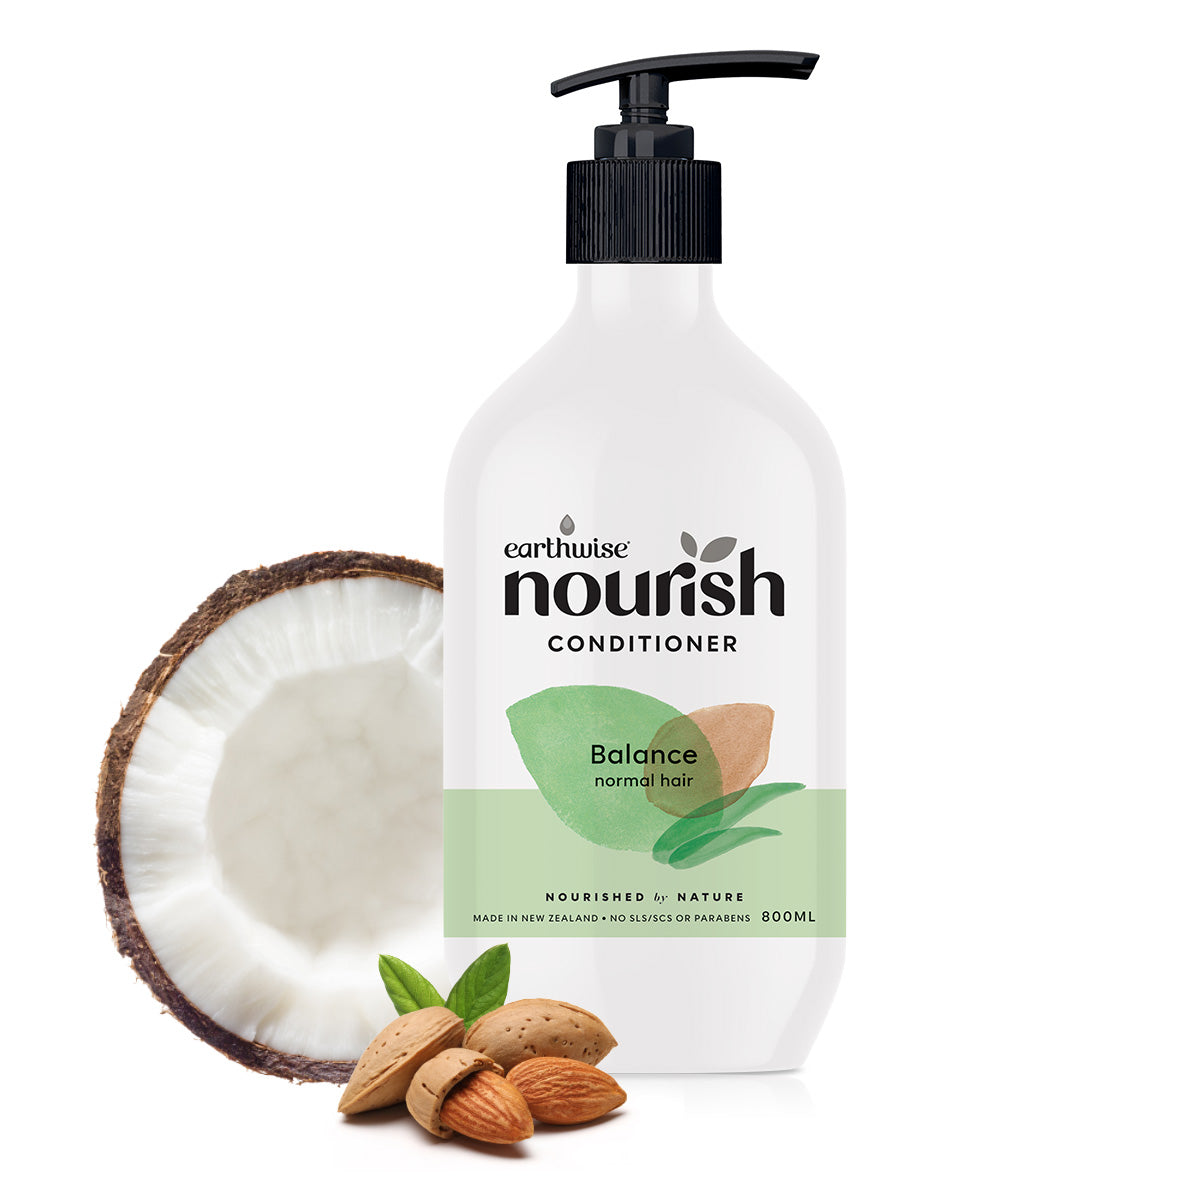 Earthwise Nourish Conditioner Balance Normal Hair 800ml-The Living Co.